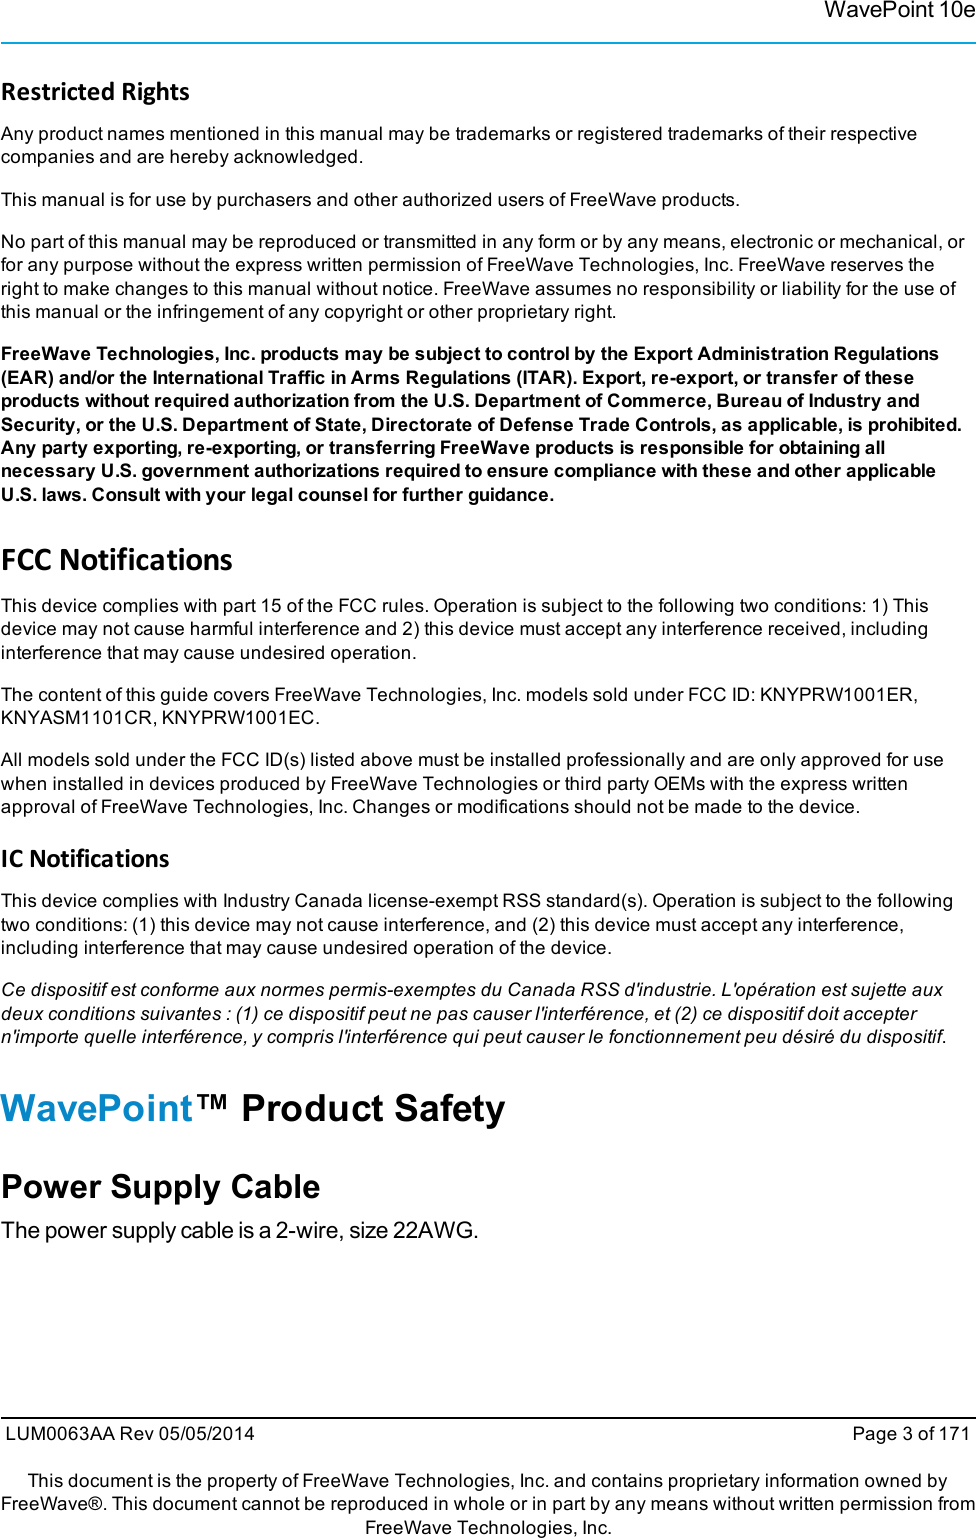 WavePoint 10eRestricted RightsAny product names mentioned in this manual may be trademarks or registered trademarks of their respectivecompanies and are hereby acknowledged.This manual is for use by purchasers and other authorized users of FreeWave products.No part of this manual may be reproduced or transmitted in any form or by any means, electronic or mechanical, orfor any purpose without the express written permission of FreeWave Technologies, Inc. FreeWave reserves theright to make changes to this manual without notice. FreeWave assumes no responsibility or liability for the use ofthis manual or the infringement of any copyright or other proprietary right.FreeWave Technologies, Inc. products may be subject to control by the Export Administration Regulations(EAR) and/or the International Traffic in Arms Regulations (ITAR). Export, re-export, or transfer of theseproducts without required authorization from the U.S. Department of Commerce, Bureau of Industry andSecurity, or the U.S. Department of State, Directorate of Defense Trade Controls, as applicable, is prohibited.Any party exporting, re-exporting, or transferring FreeWave products is responsible for obtaining allnecessary U.S. government authorizations required to ensure compliance with these and other applicableU.S. laws. Consult with your legal counsel for further guidance.FCC NotificationsThis device complies with part 15 of the FCC rules. Operation is subject to the following two conditions: 1) Thisdevice may not cause harmful interference and 2) this device must accept any interference received, includinginterference that may cause undesired operation.The content of this guide covers FreeWave Technologies, Inc. models sold under FCC ID: KNYPRW1001ER,KNYASM1101CR, KNYPRW1001EC.All models sold under the FCC ID(s) listed above must be installed professionally and are only approved for usewhen installed in devices produced by FreeWave Technologies or third party OEMs with the express writtenapproval of FreeWave Technologies, Inc. Changes or modifications should not be made to the device.IC NotificationsThis device complies with Industry Canada license-exempt RSS standard(s). Operation is subject to the followingtwo conditions: (1) this device may not cause interference, and (2) this device must accept any interference,including interference that may cause undesired operation of the device.Ce dispositif est conforme aux normes permis-exemptes du Canada RSS d&apos;industrie. L&apos;opération est sujette auxdeux conditions suivantes : (1) ce dispositif peut ne pas causer l&apos;interférence, et (2) ce dispositif doit acceptern&apos;importe quelle interférence, y compris l&apos;interférence qui peut causer le fonctionnement peu désiré du dispositif.WavePoint™ Product SafetyPower Supply CableThe power supply cable is a 2-wire, size 22AWG.LUM0063AA Rev 05/05/2014 Page 3 of 171This document is the property of FreeWave Technologies, Inc. and contains proprietary information owned byFreeWave®. This document cannot be reproduced in whole or in part by any means without written permission fromFreeWave Technologies, Inc.